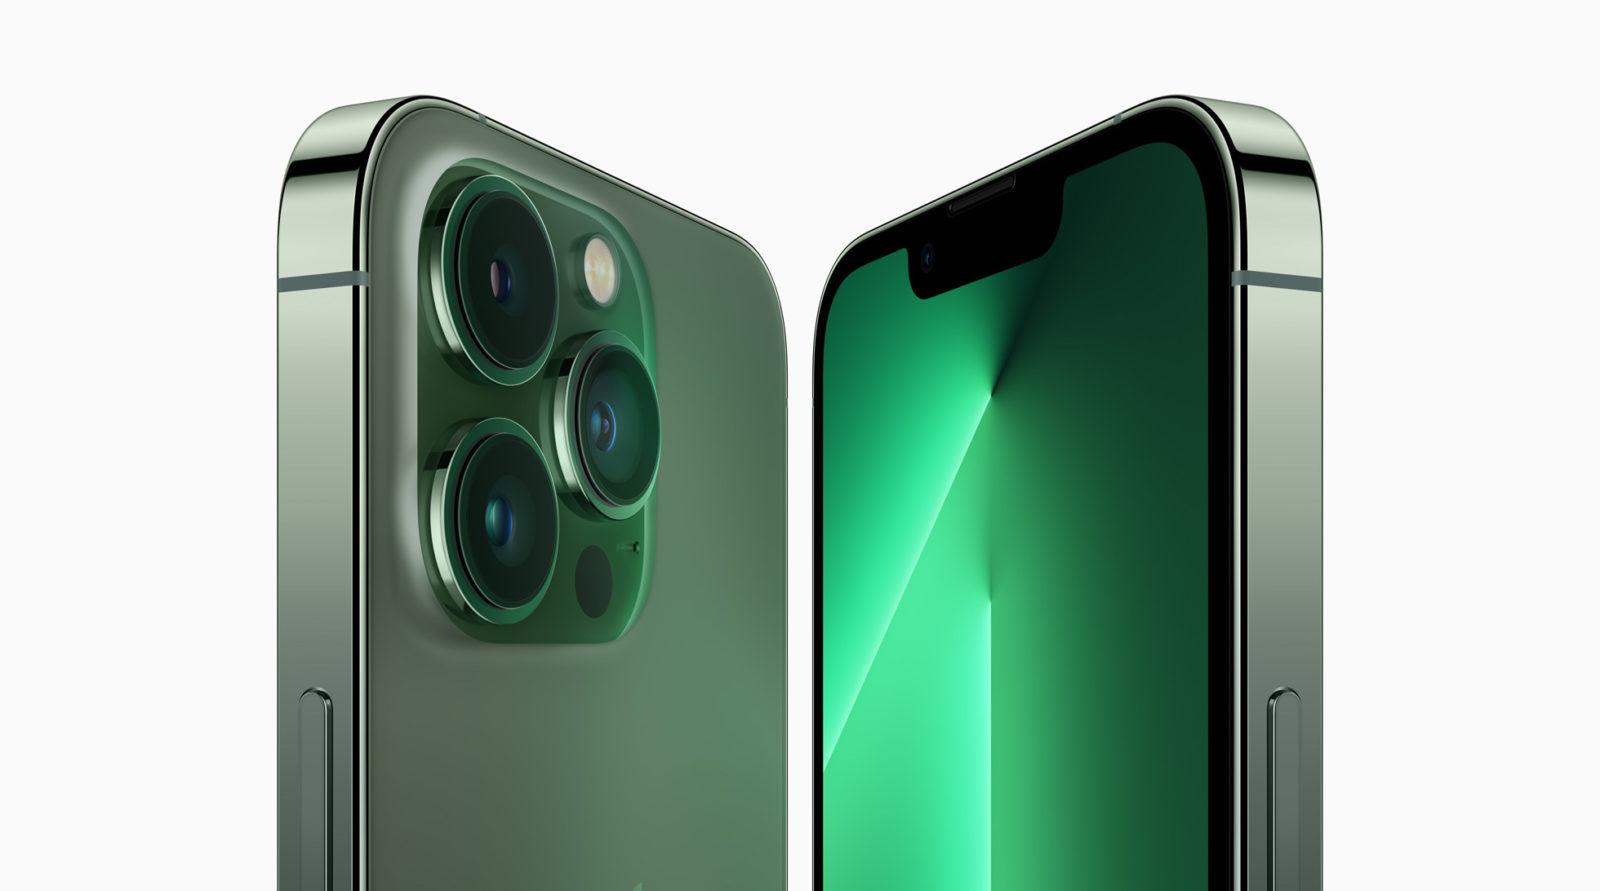 New iPhone 13 in green, iPad Air, and Mac Studio — all the new Apple products for 2022